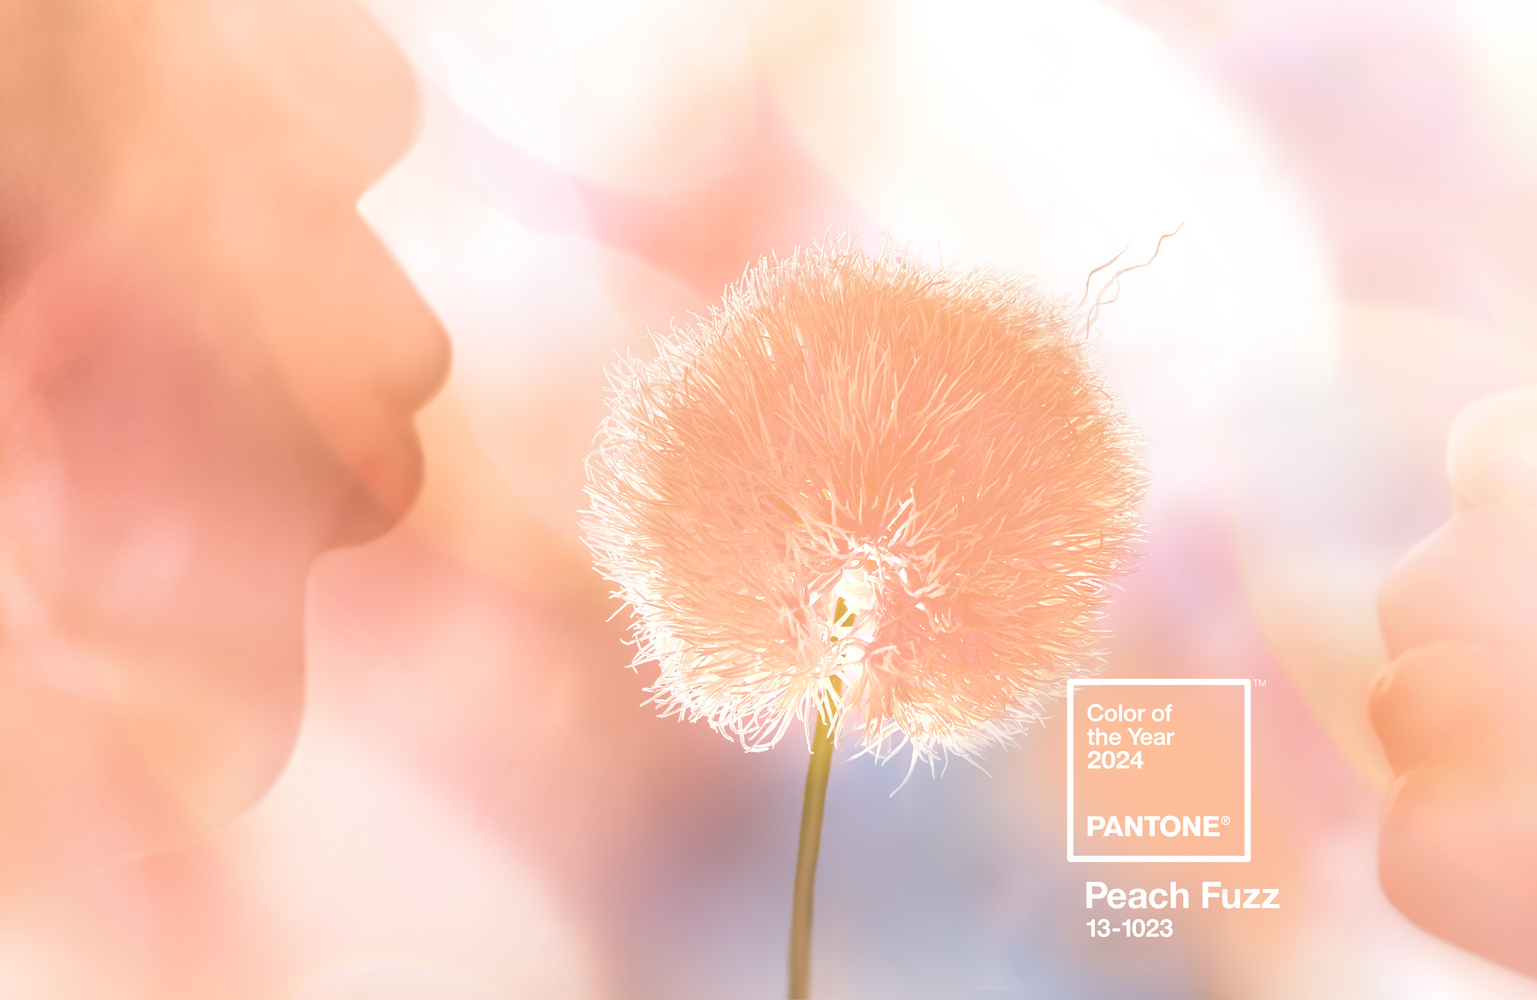 pantone-reveals-peach-fuzz-as-color-of-the-year-2024_1